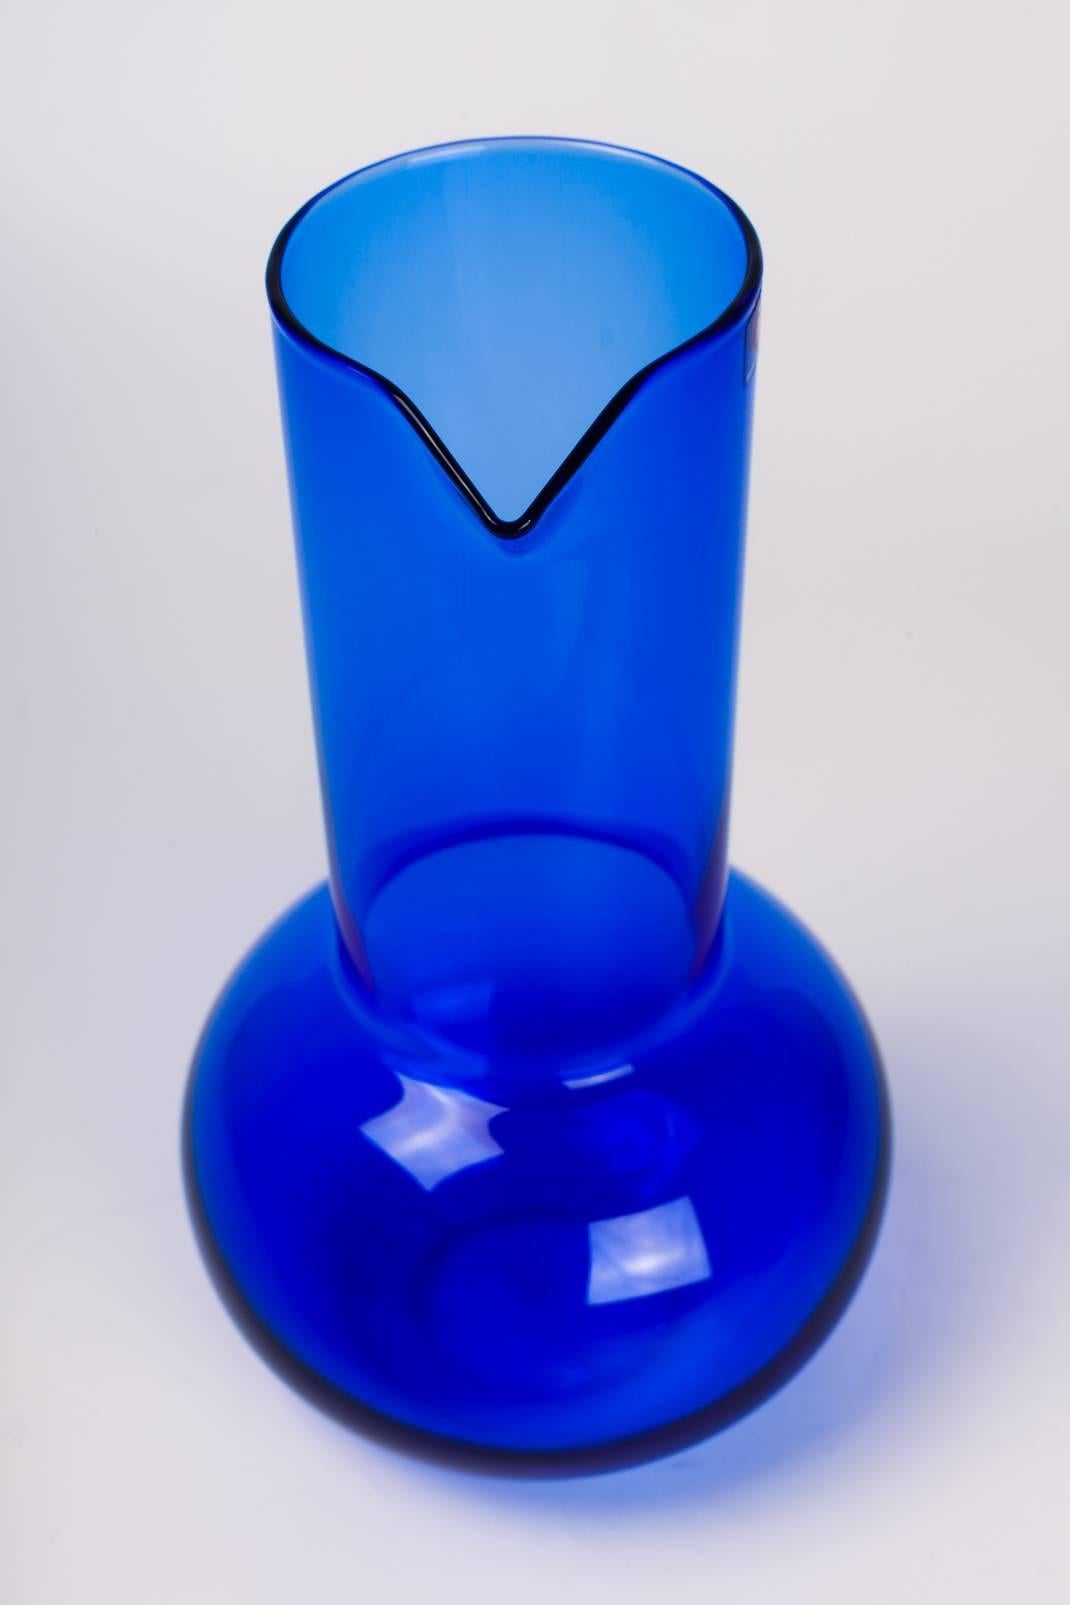 Brilliant blue decanter designed by Kaj Franck in the 1960s. Ergonomic neck and spout with generous, round vessel. It can be used at the table or displayed as a decorative object on a shelf or table. 

Founded in 1881, littala is the most